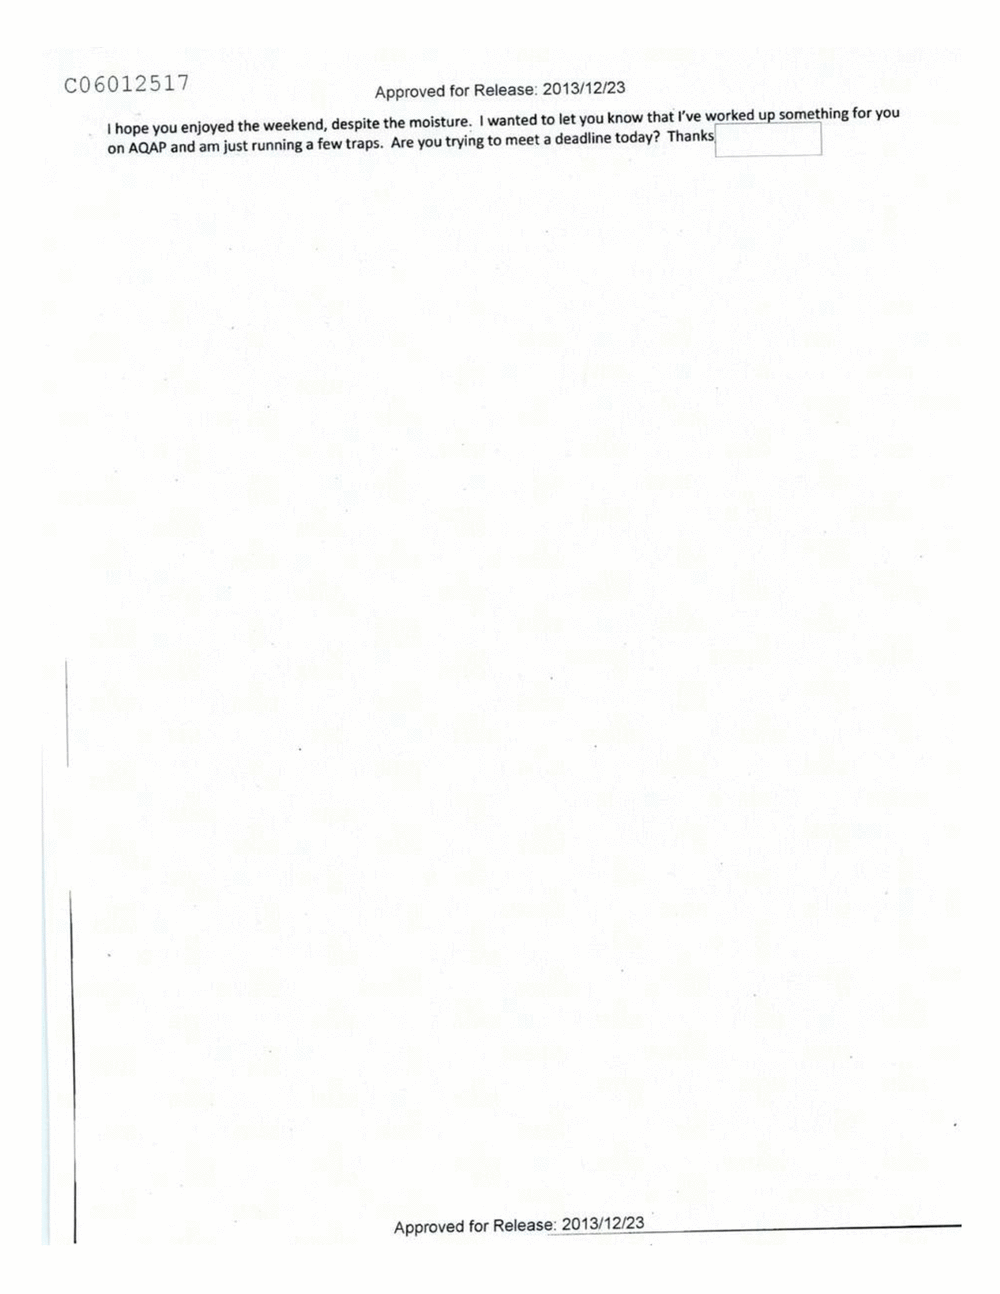 Page 36 from Email Correspondence Between Reporters and CIA Flacks